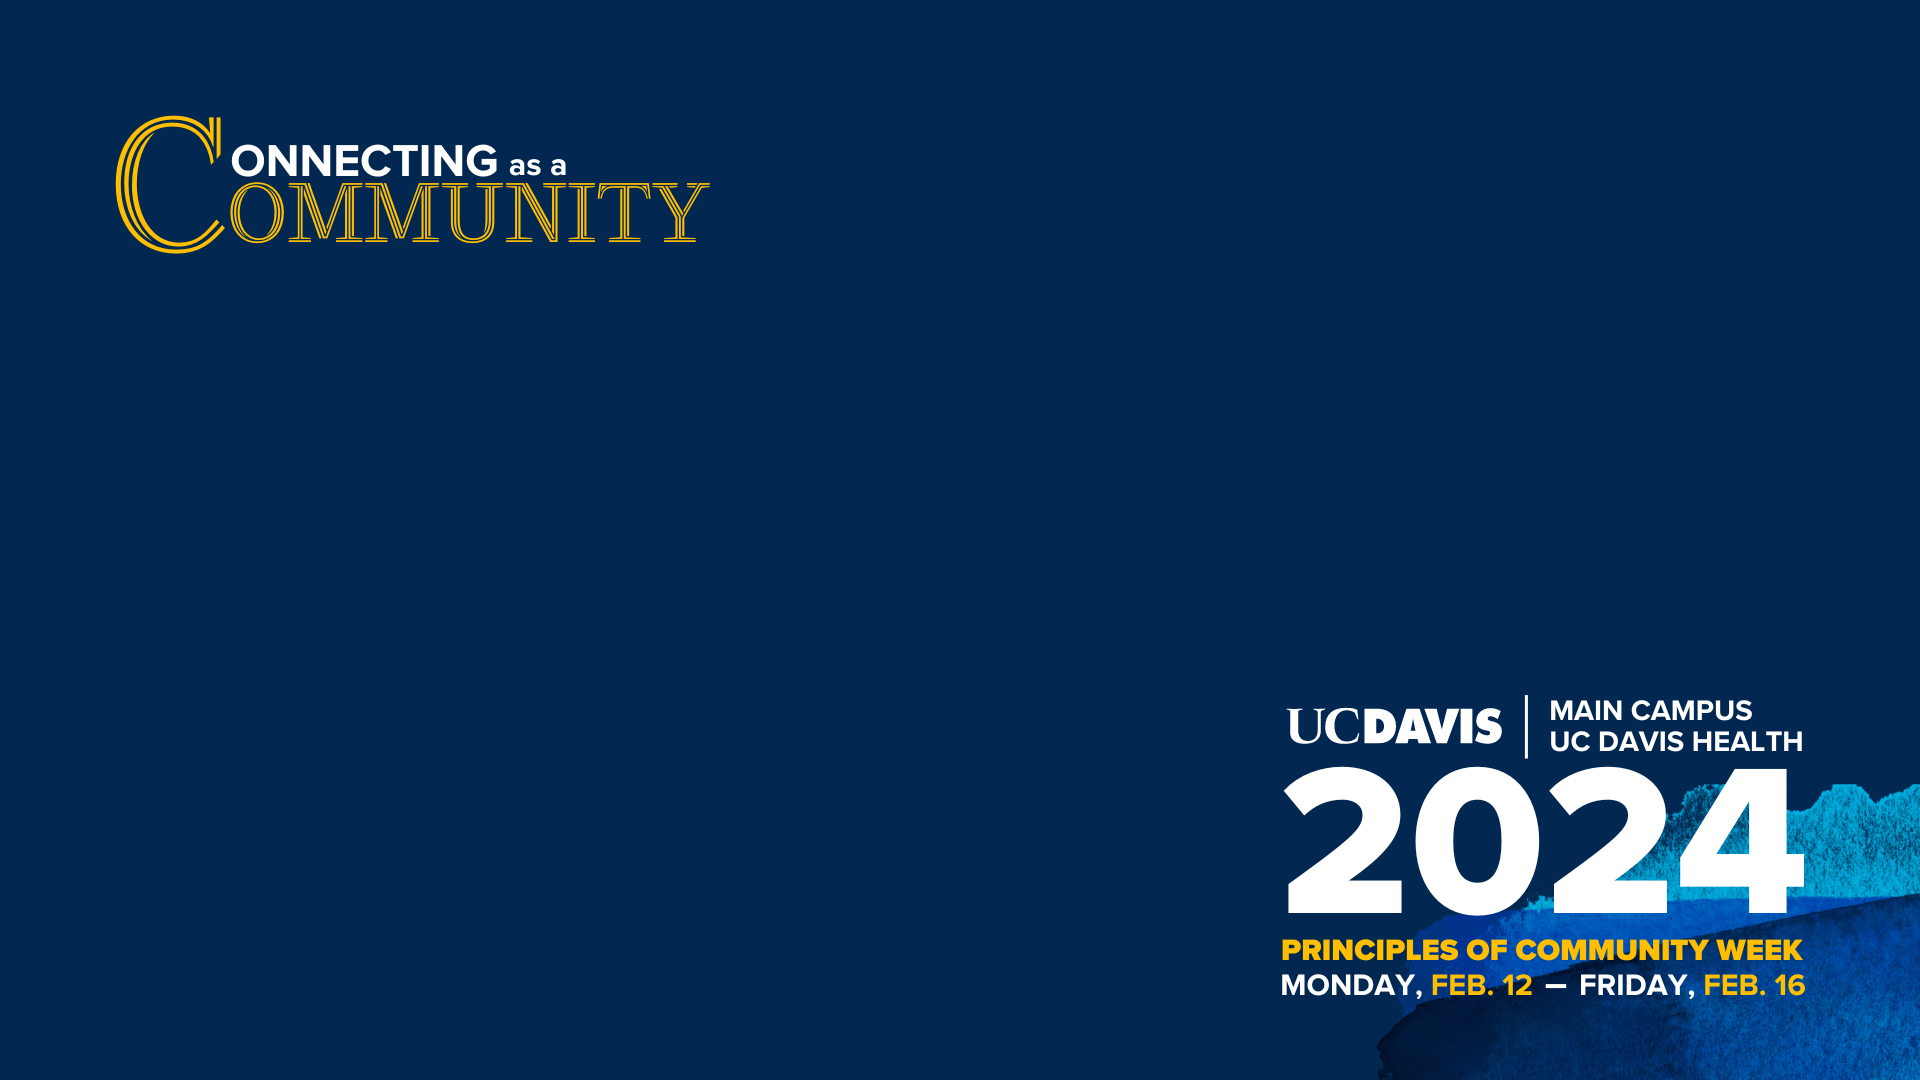 Dark Blue Zoom background Connecting as a Community Principles of Community Week 2024 UC Davis and UC Davis Health